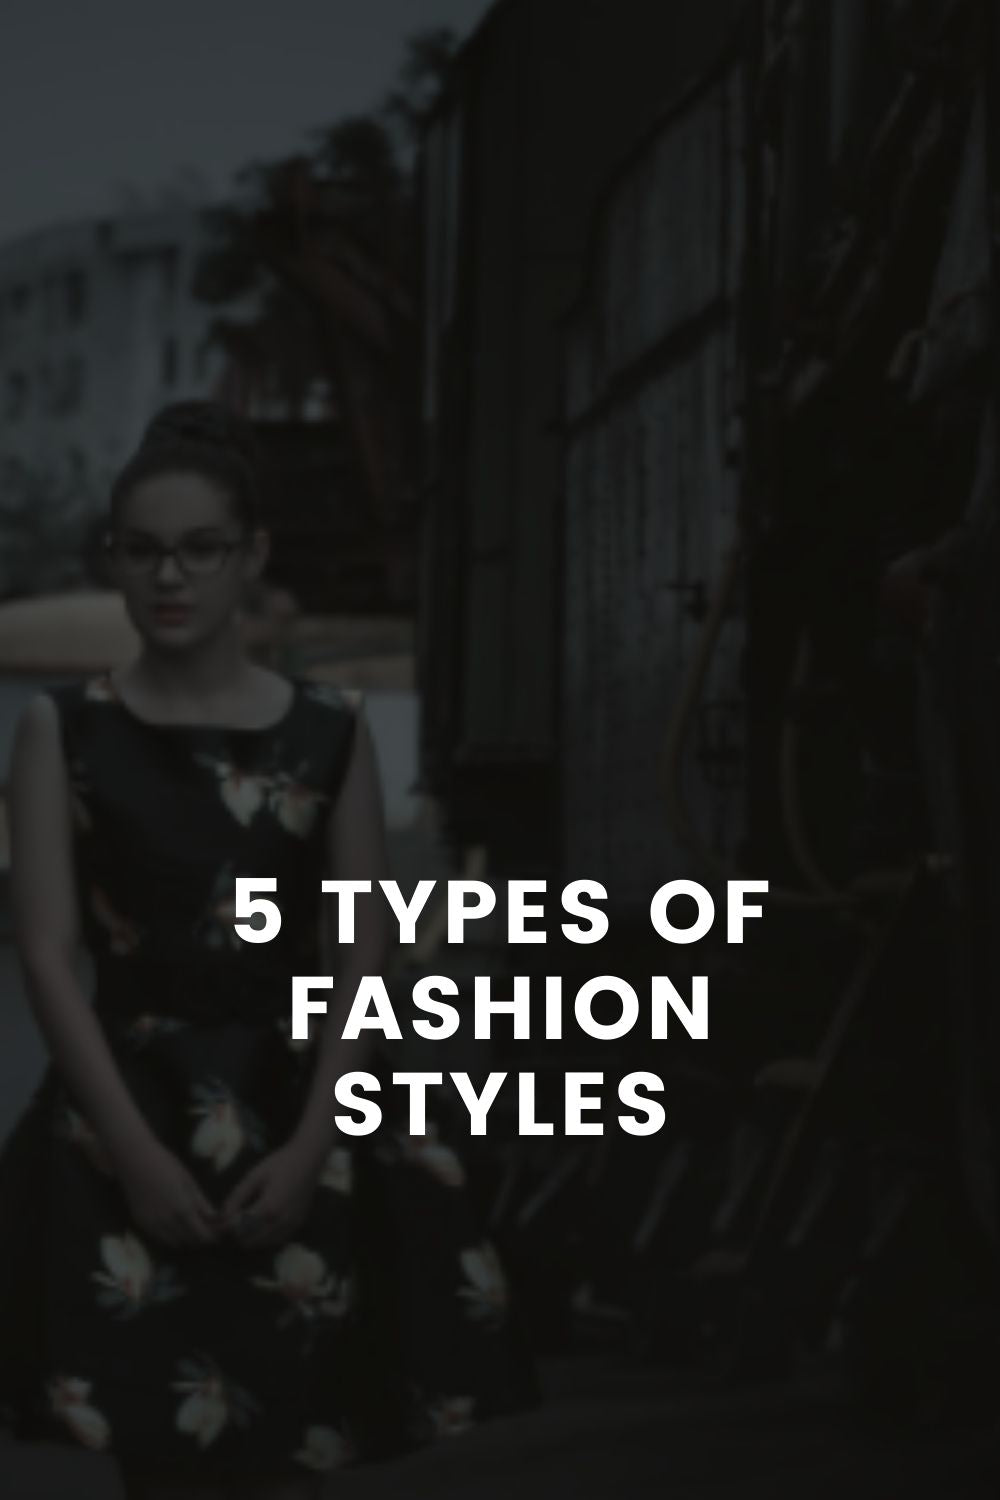 5 Types of Fashion Styles